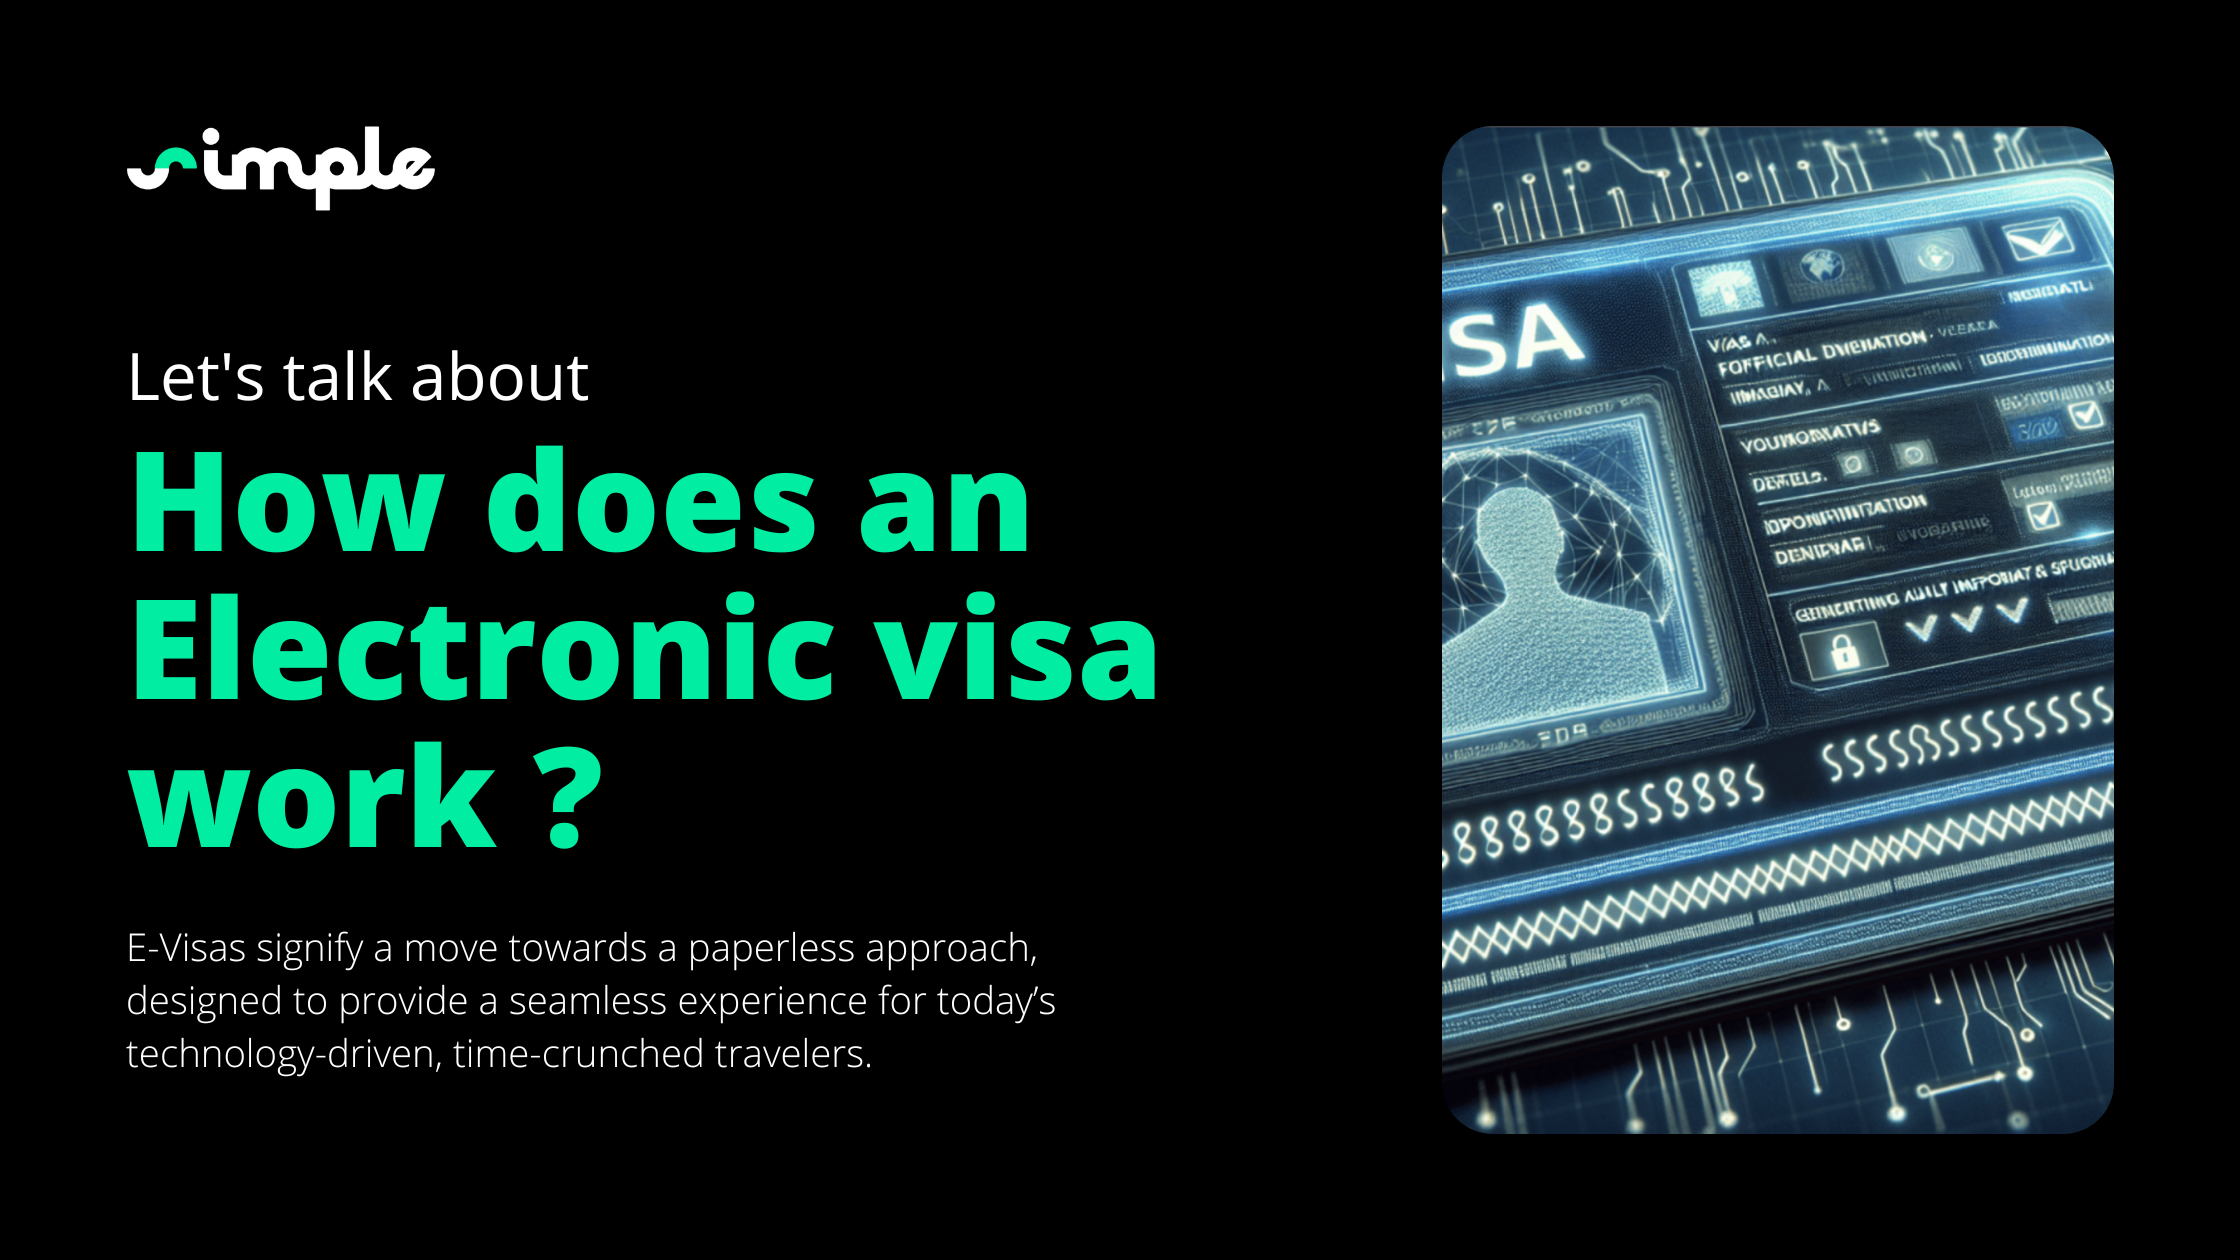 How does an electronic visa work?